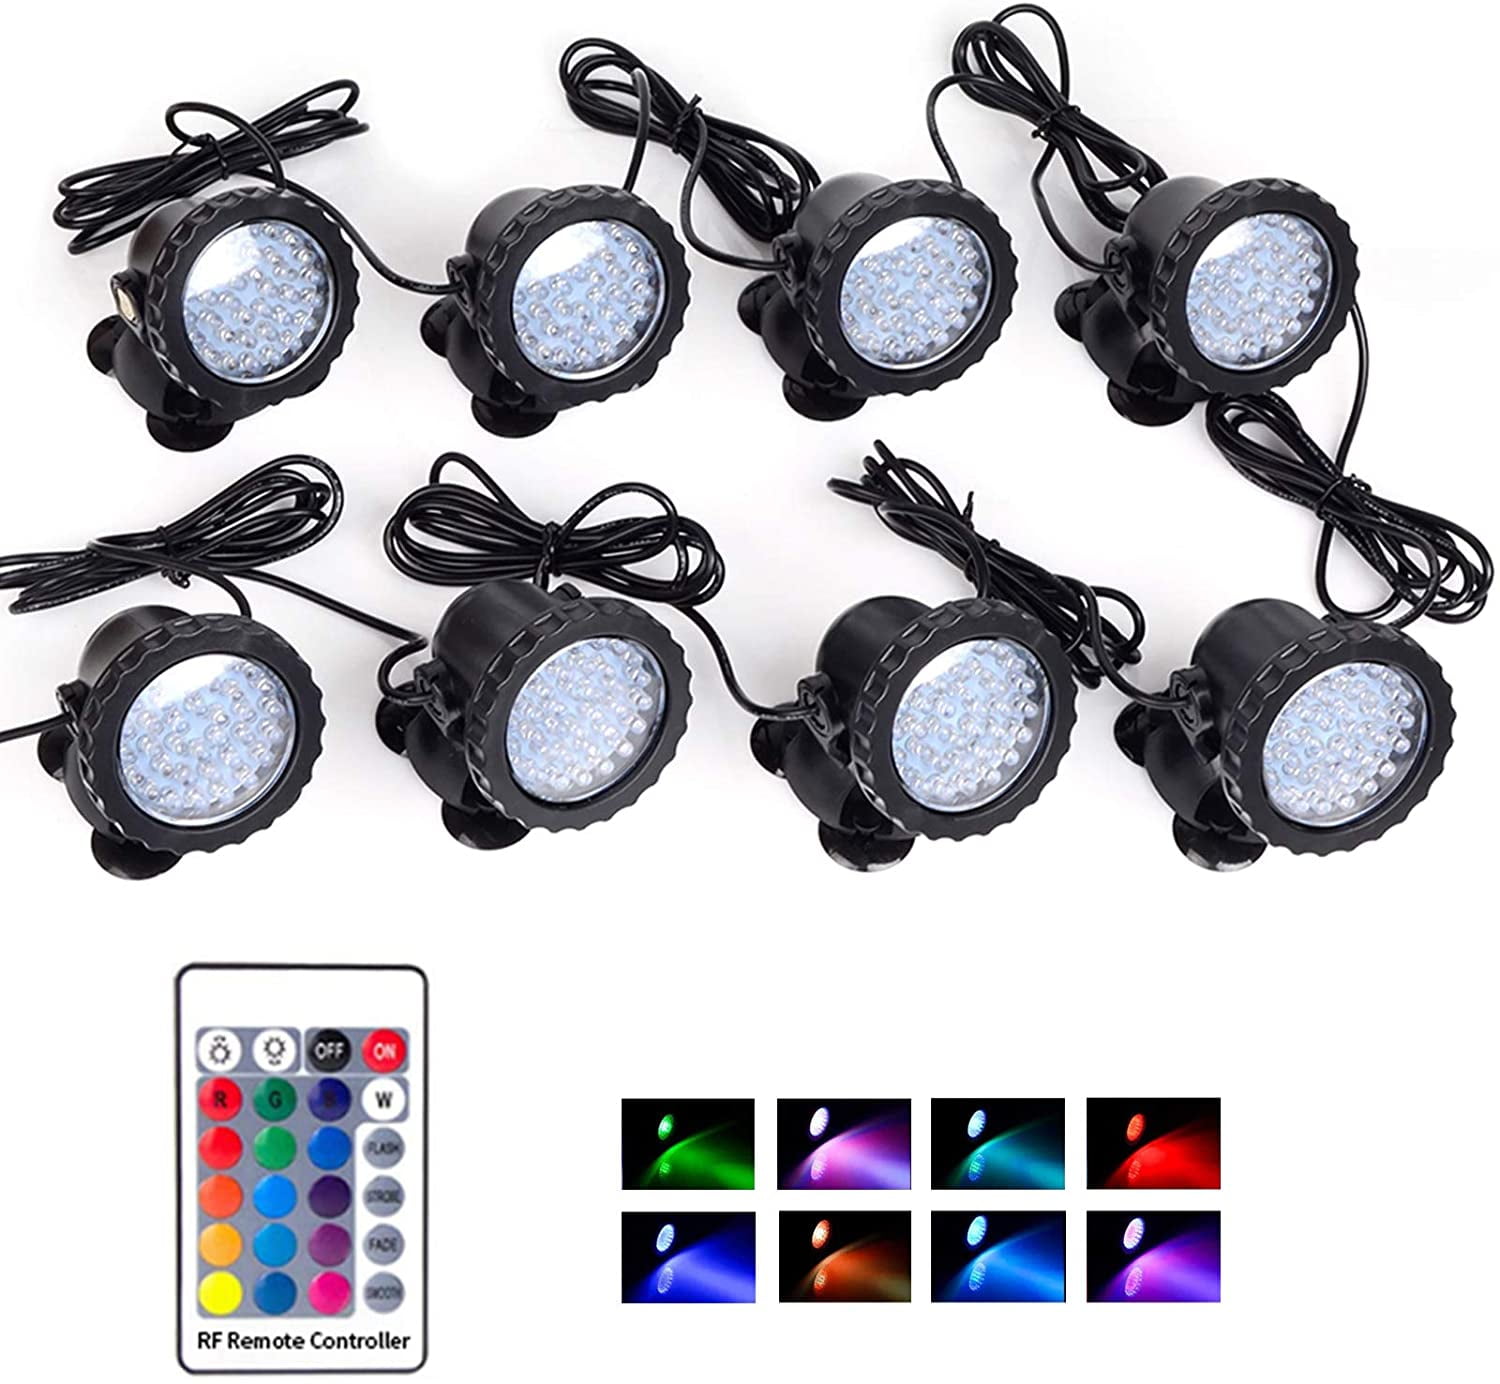 LED Garden Pond Light Submersible Spot Lamp with Remote Control RGB Color Changing Underwater Light 36 LEDs IP68 Waterproof for Fountain Pool Aquarium Fish Tank Decoration